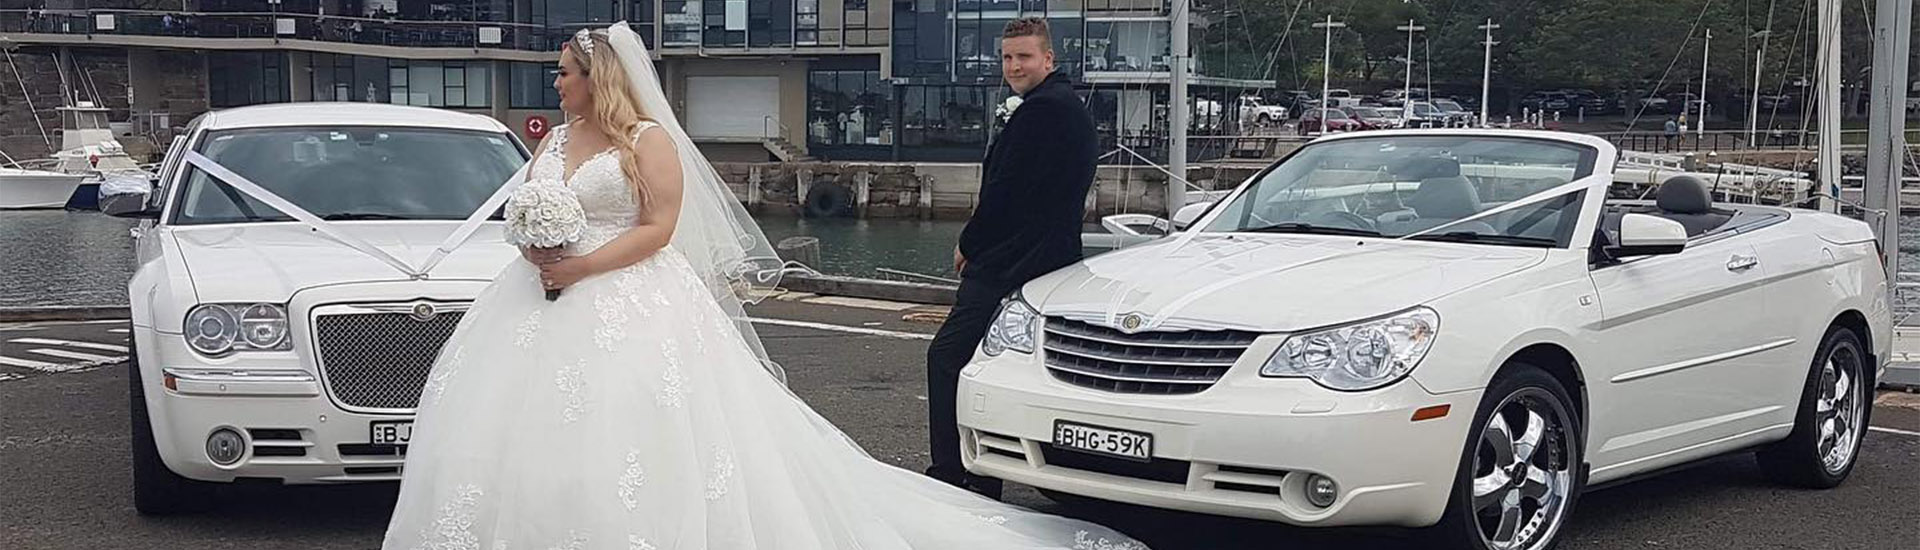 Benefits of Hiring a Chrysler 300c from A1 Limousines for Sydney Weddings